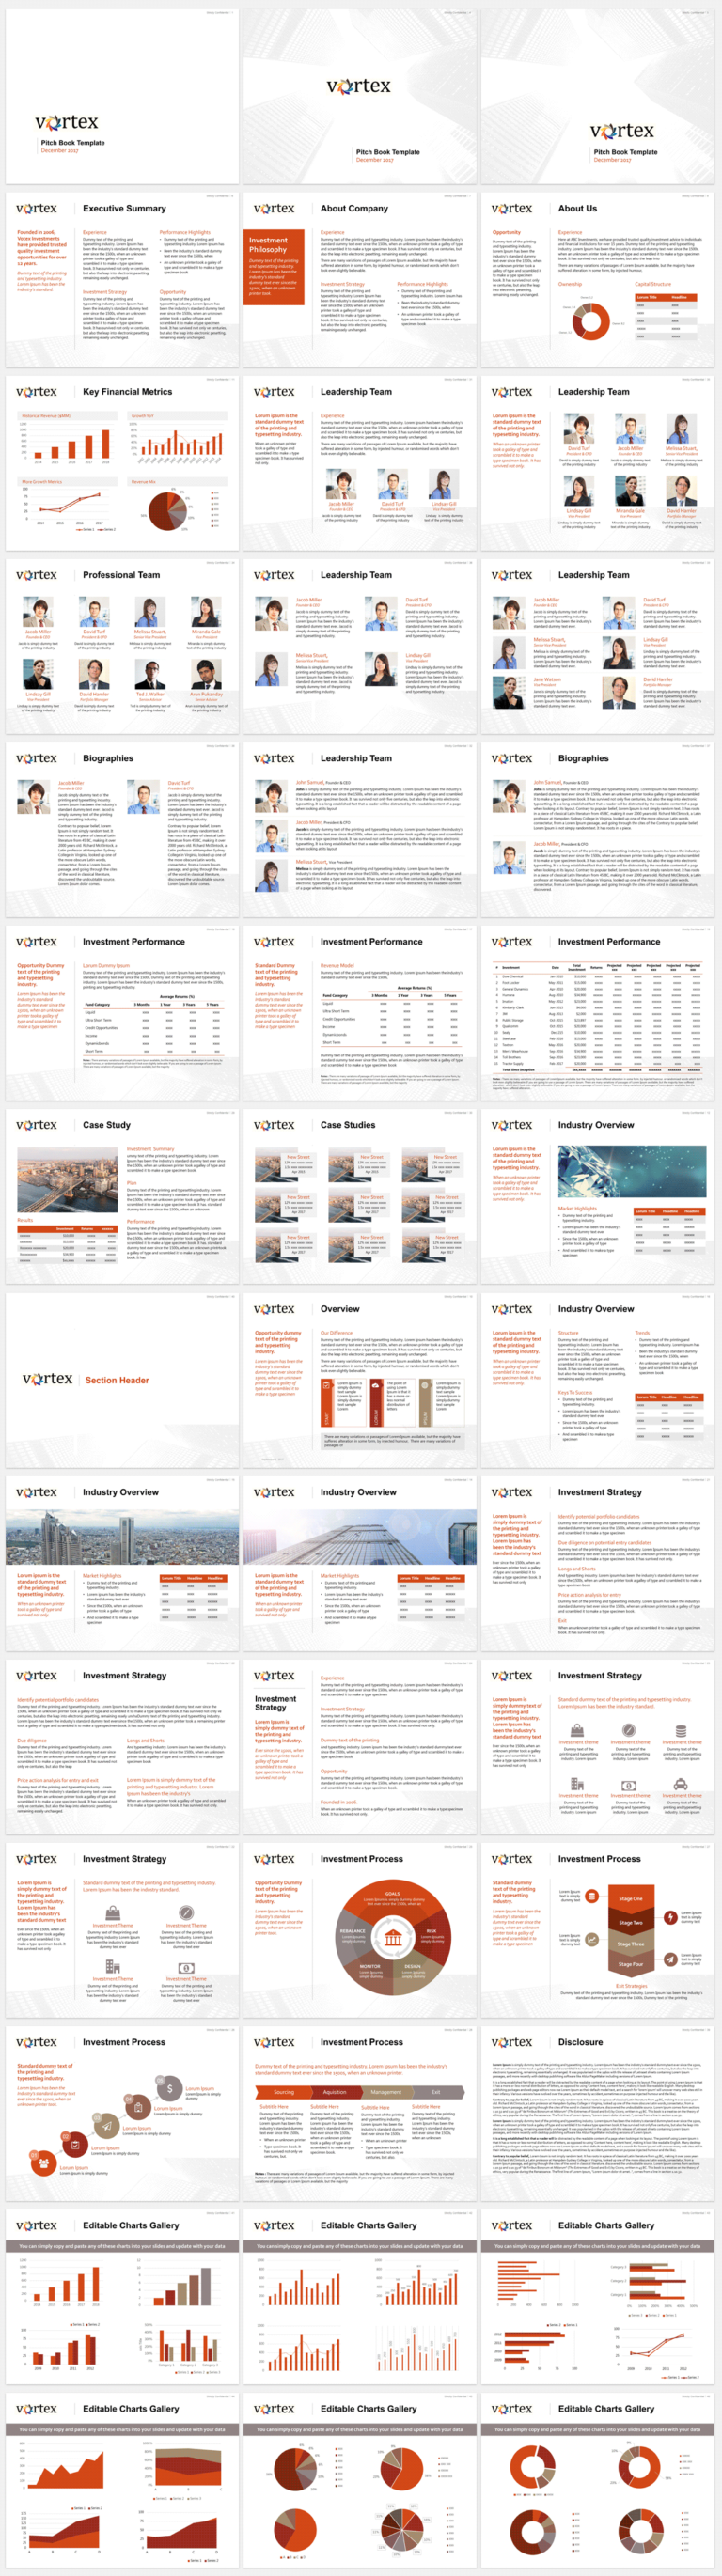 Powerpoint Pitch Book Template